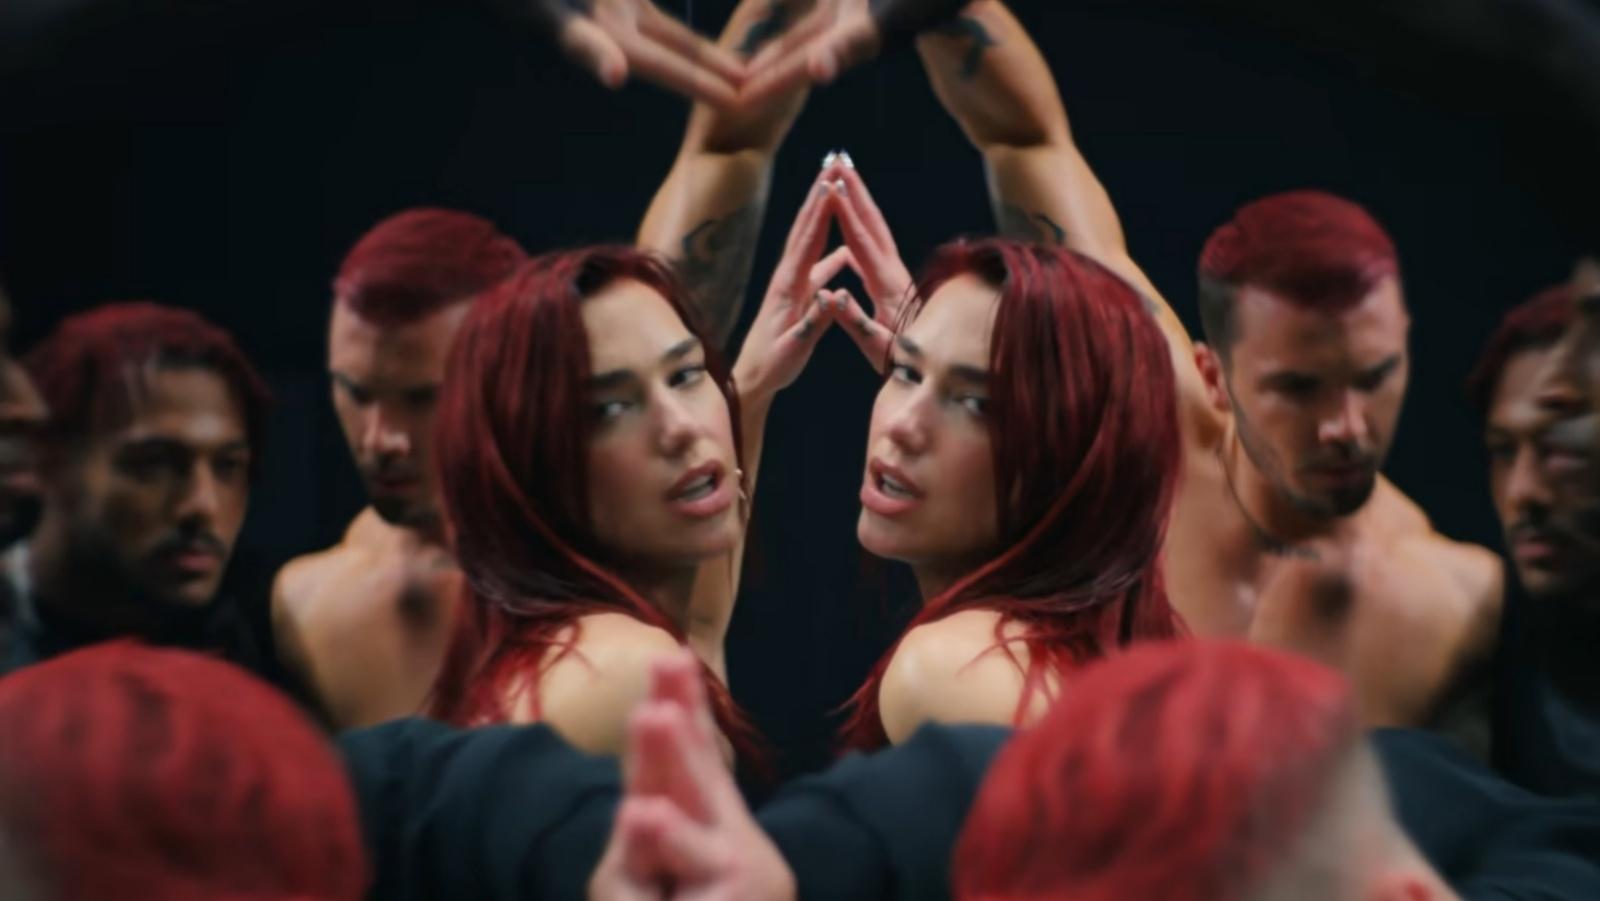 Dua Lipa with red hair poses in front of a mirror